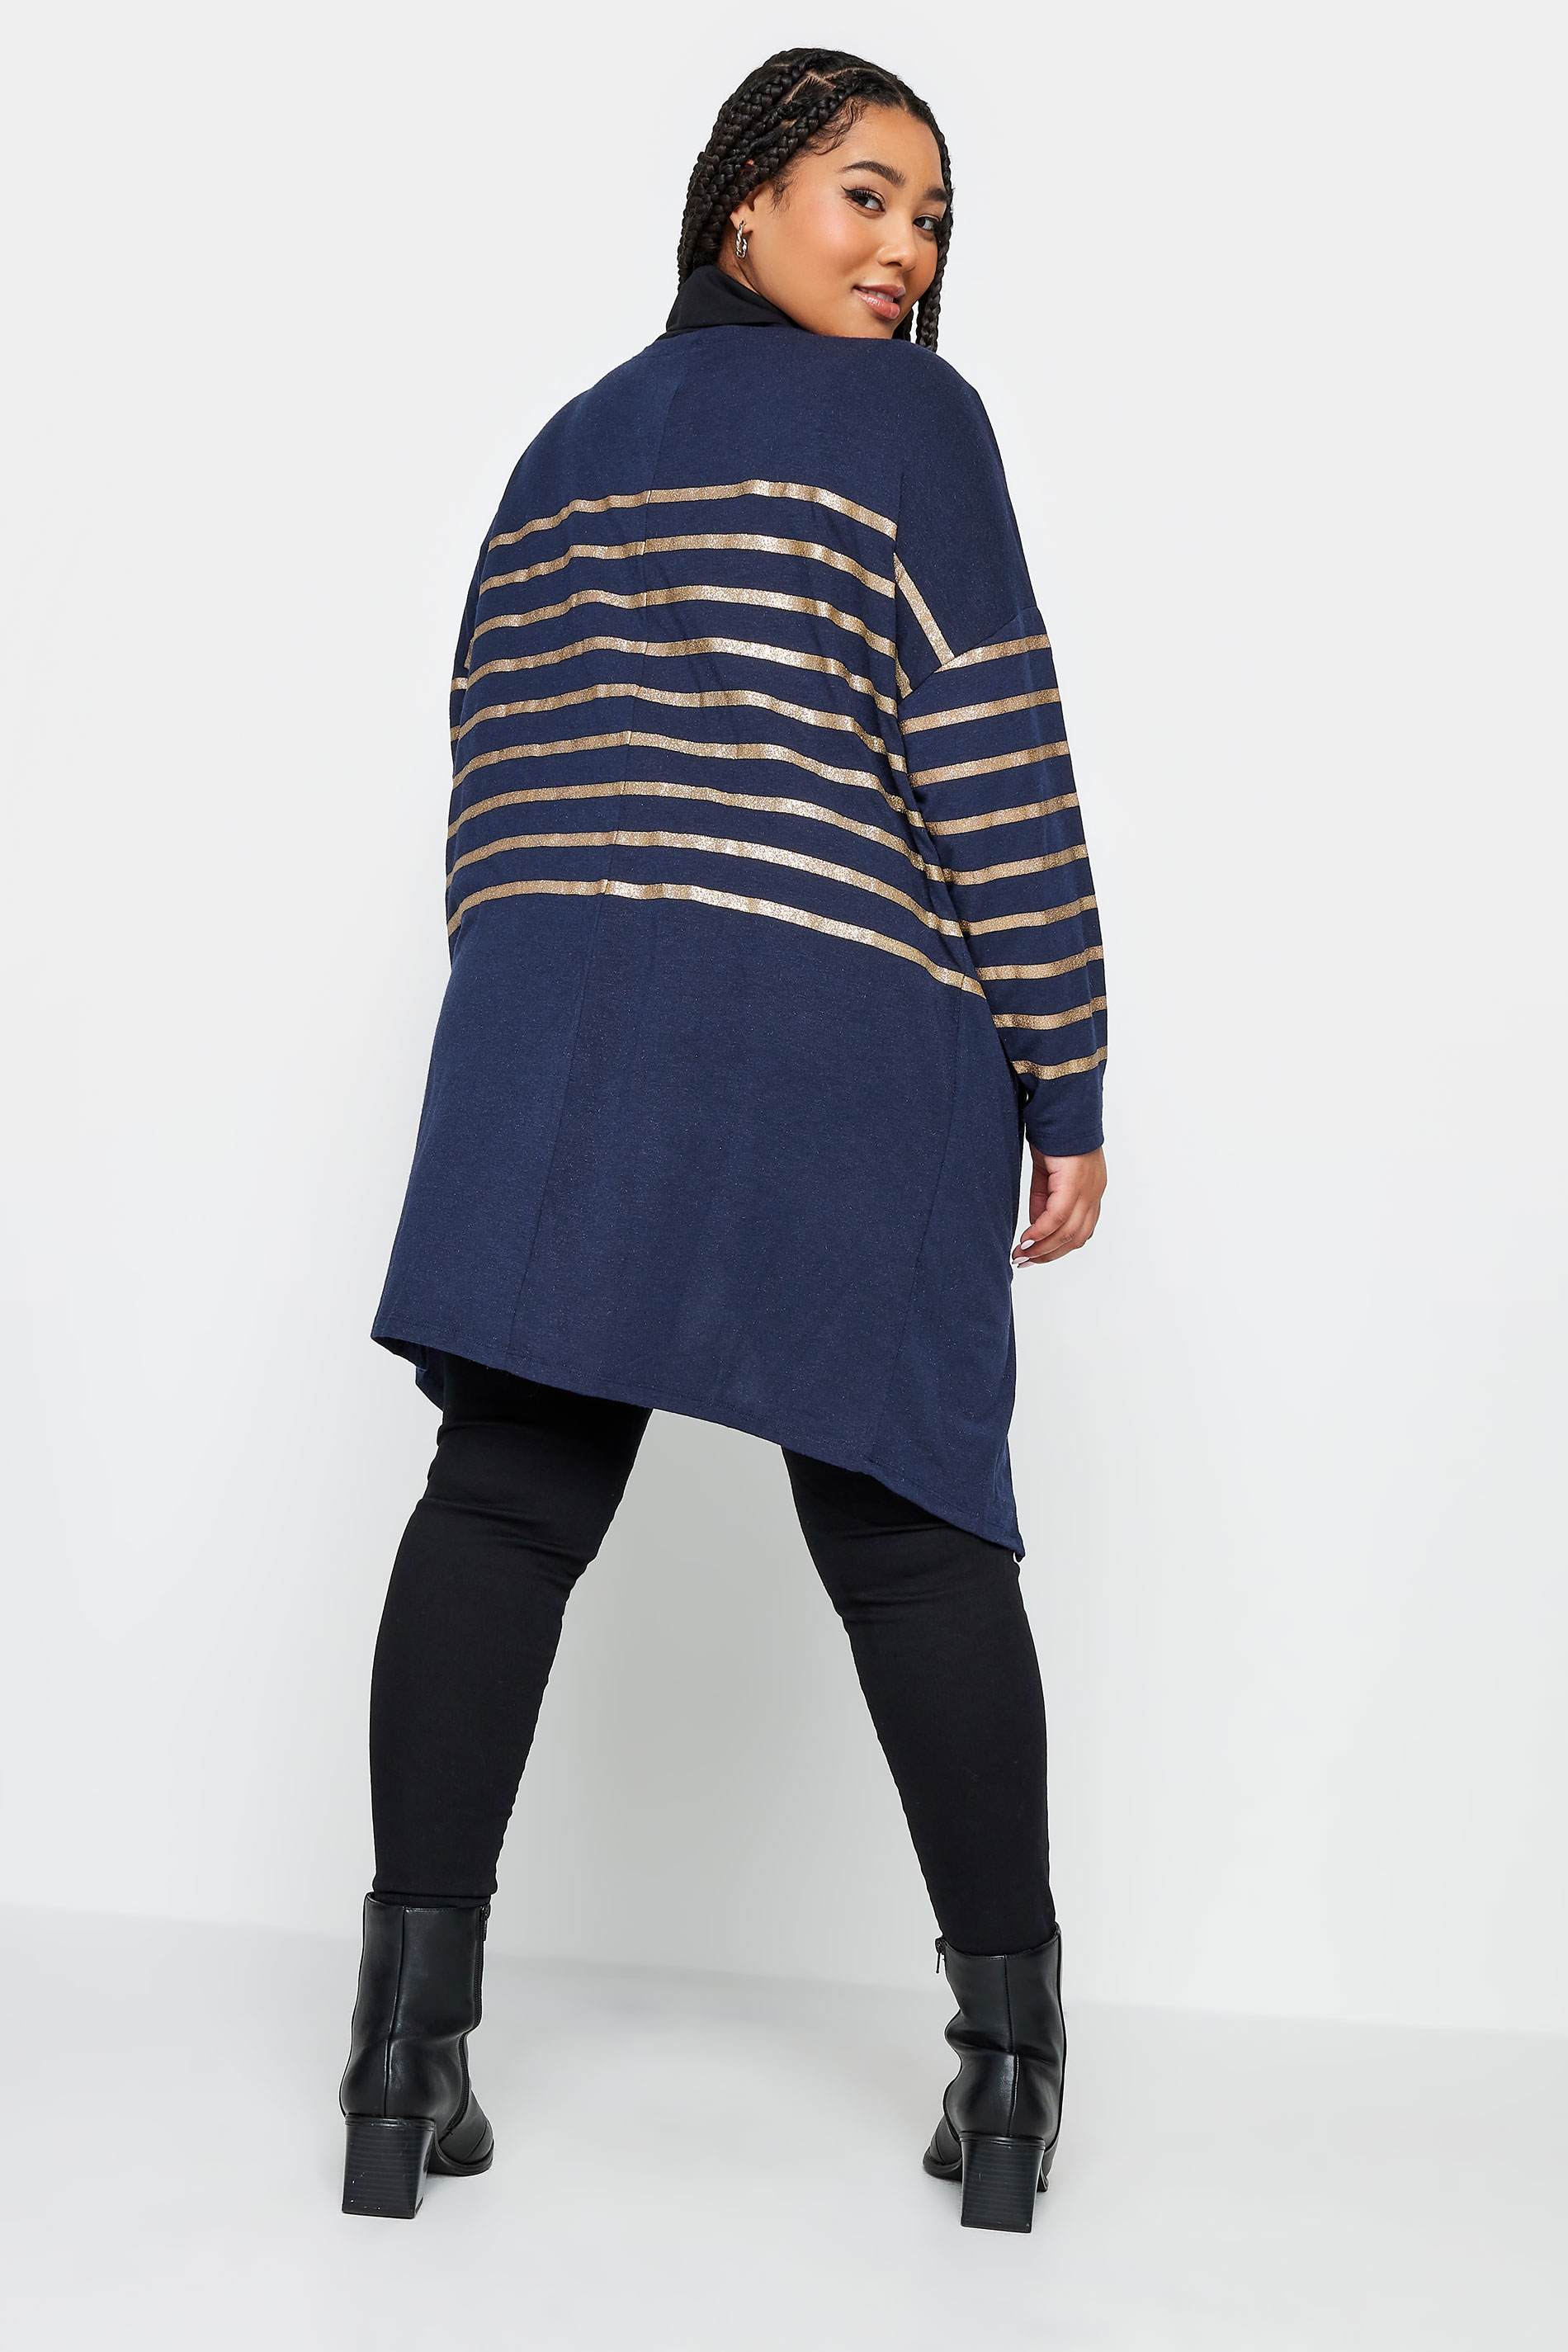 YOURS Plus Size Blue Metallic Striped Cardigan | Yours Clothing 3